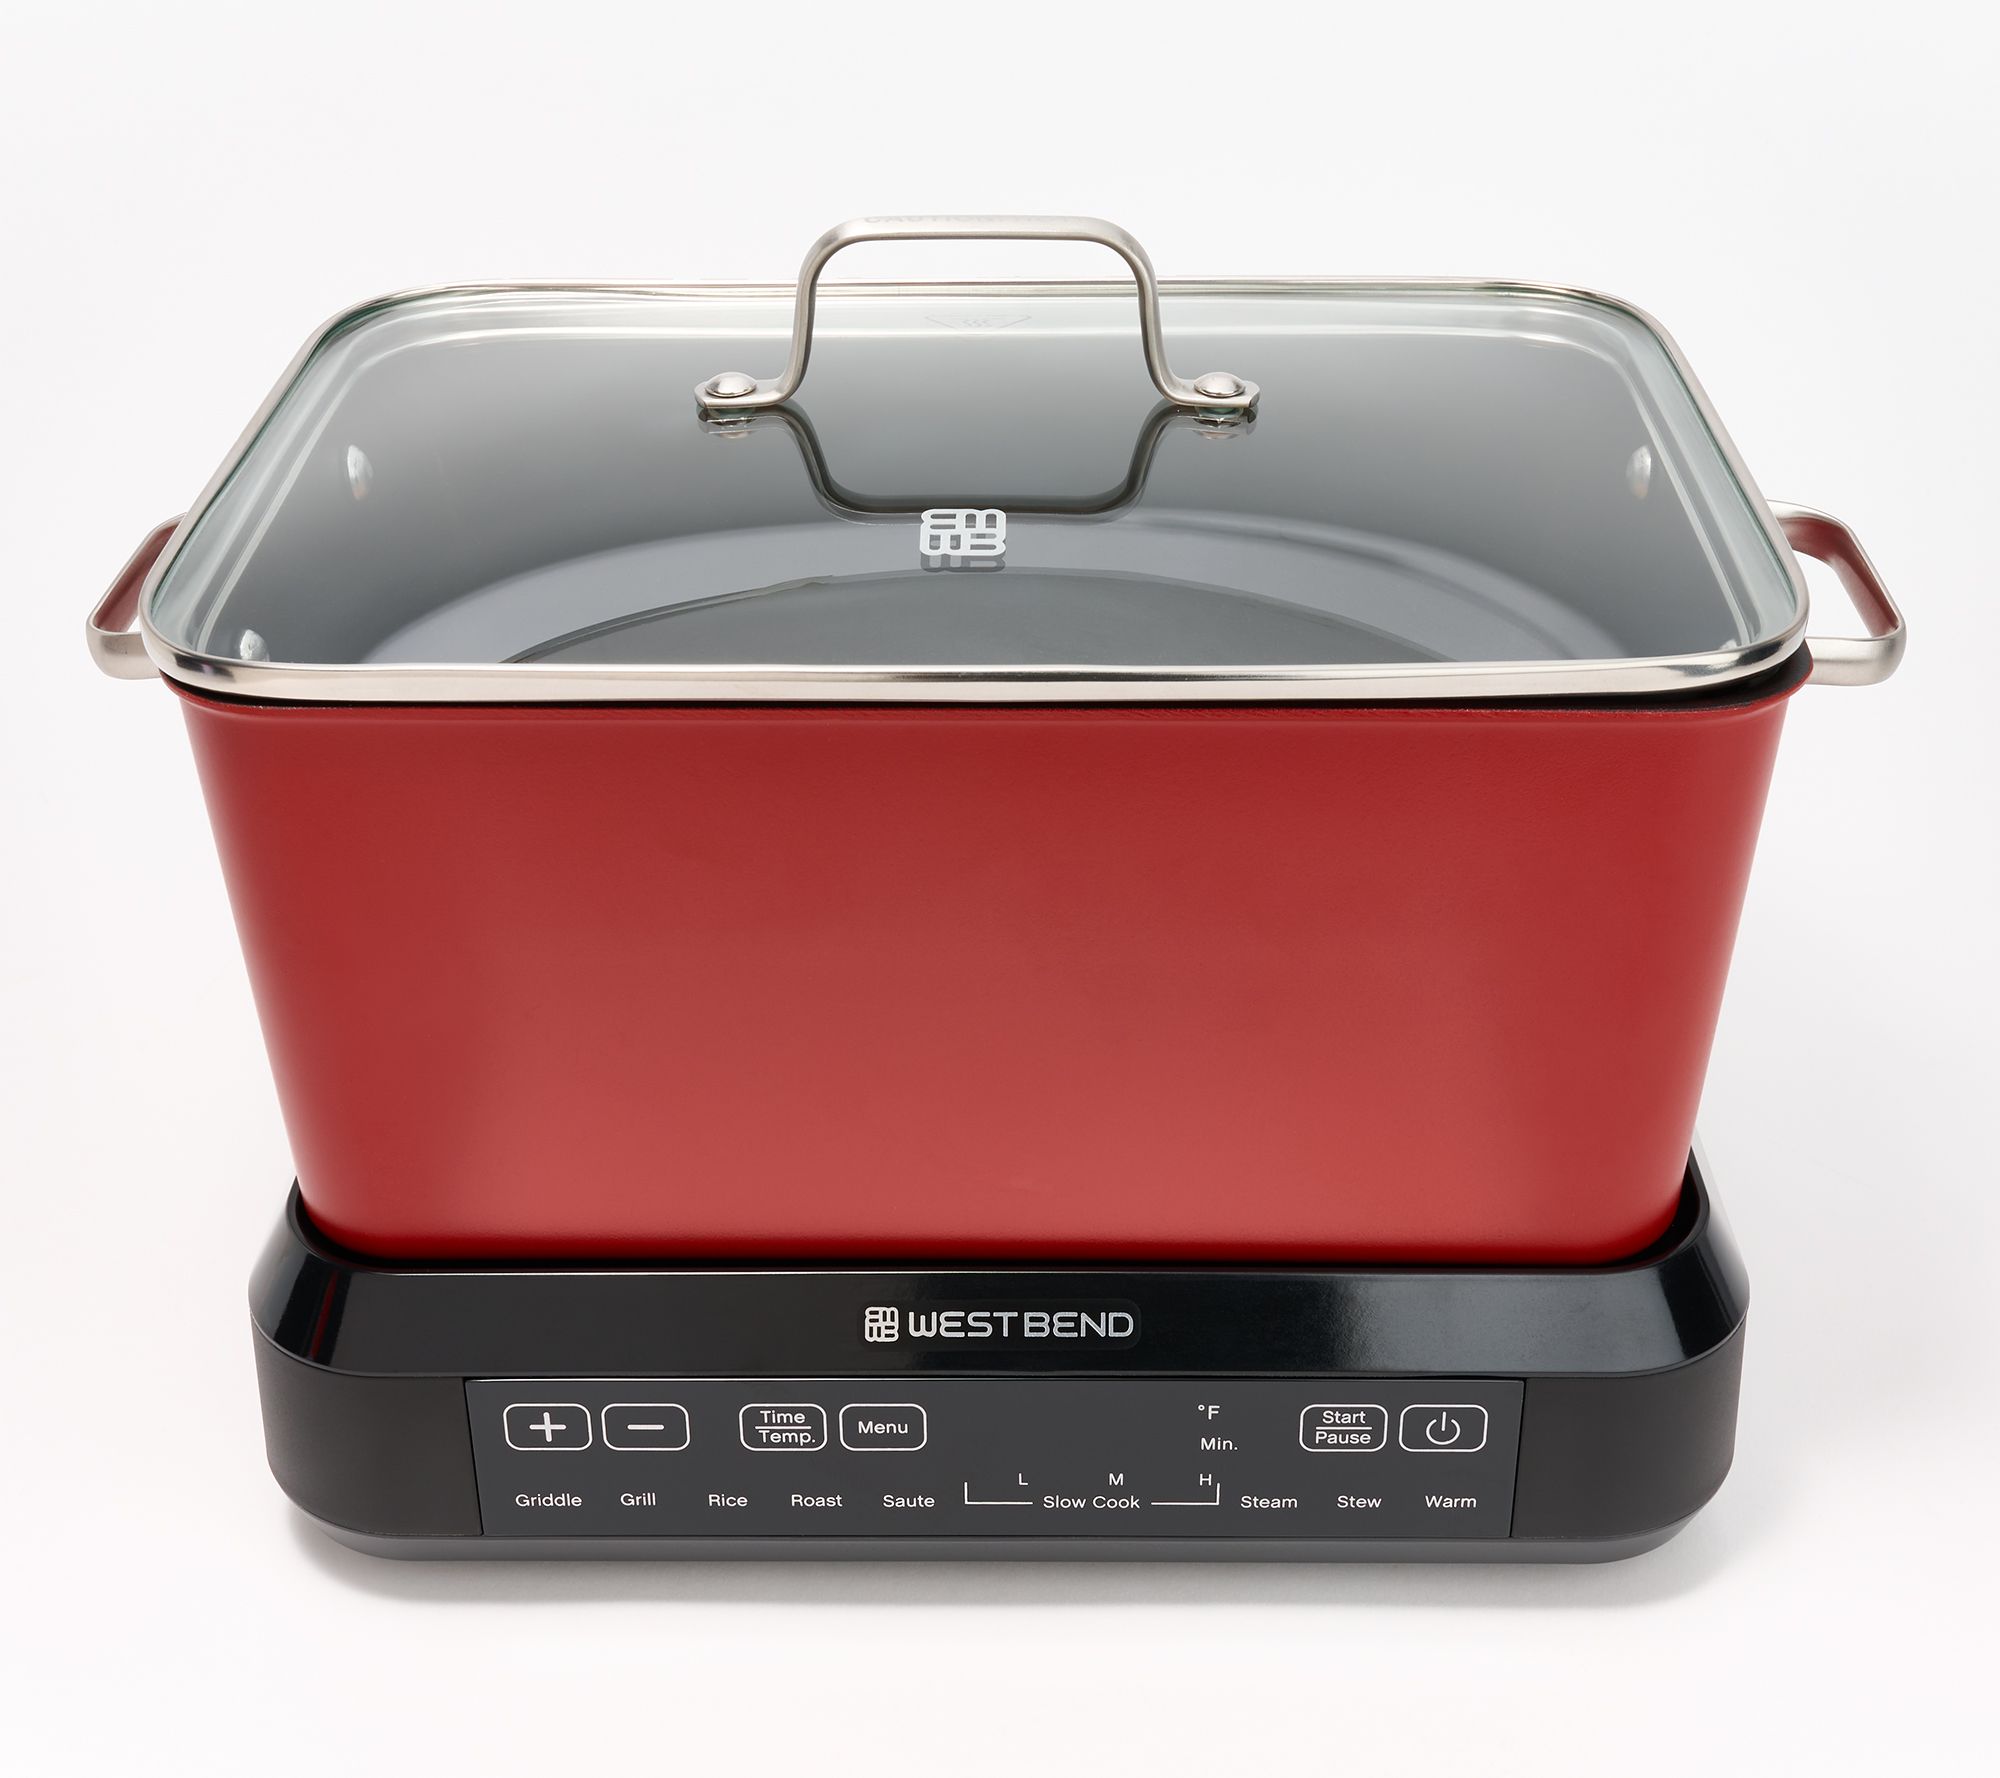 Courant 3.2 Qt Twin Slow Cooker (1.6 Qt Each) - Red : Target